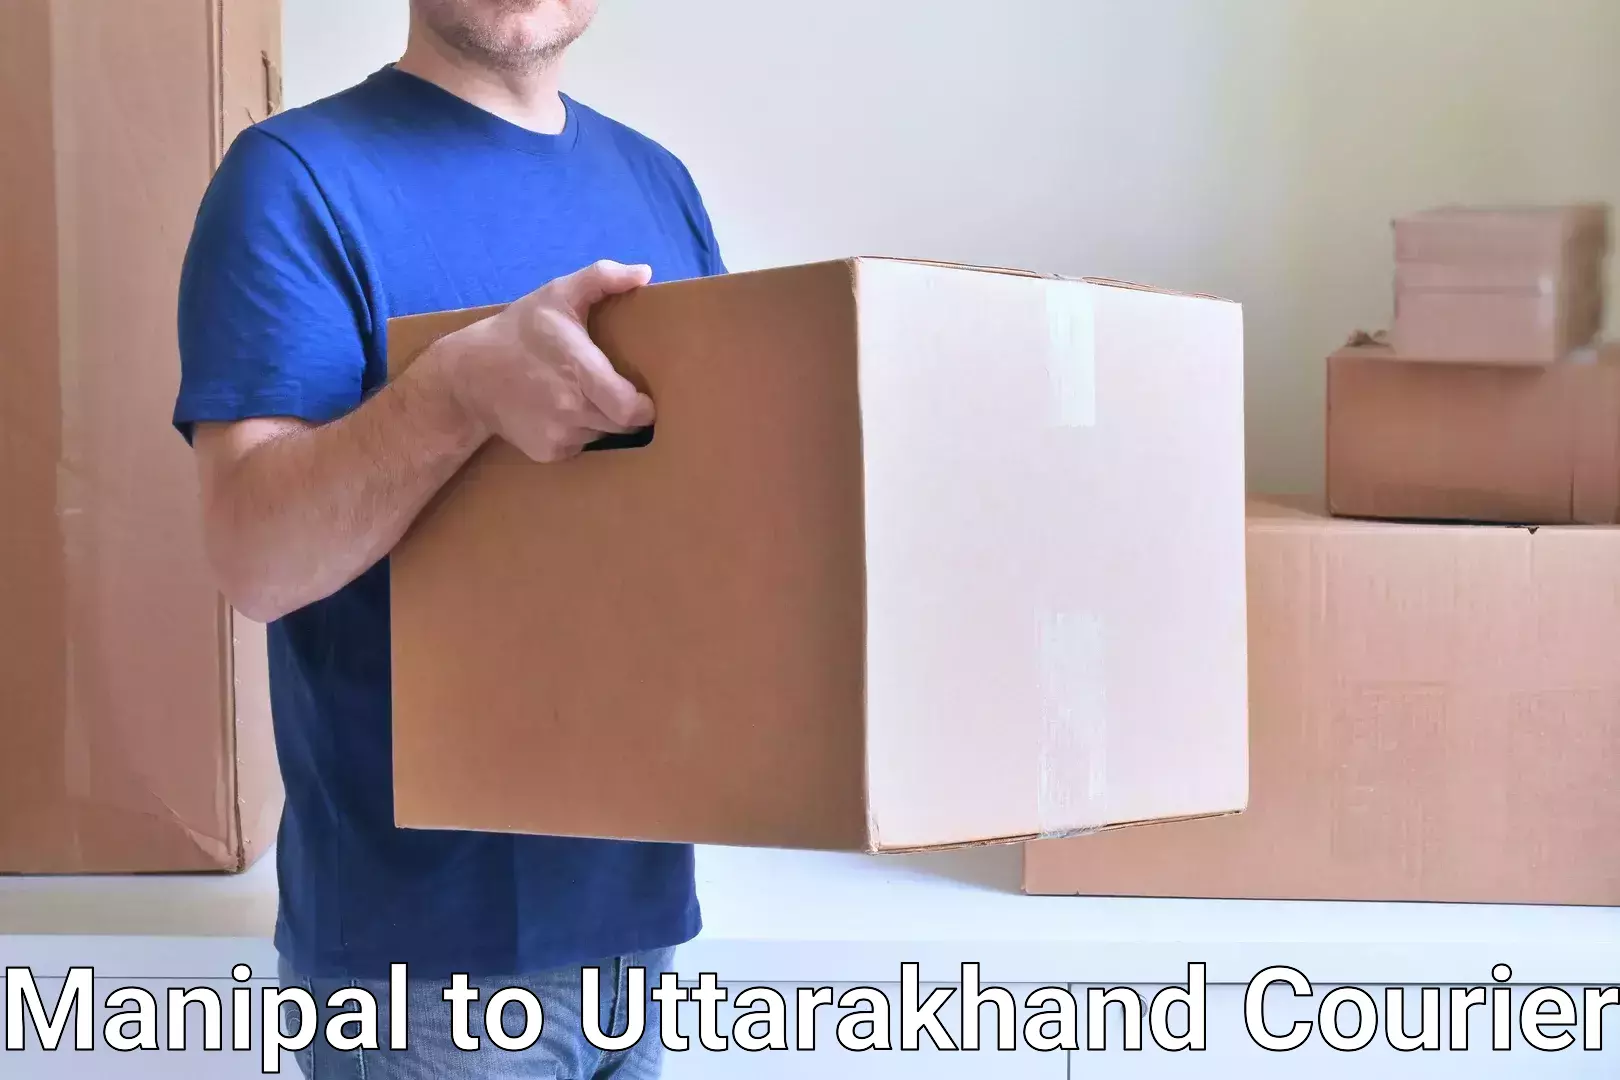 24/7 courier service in Manipal to Haldwani